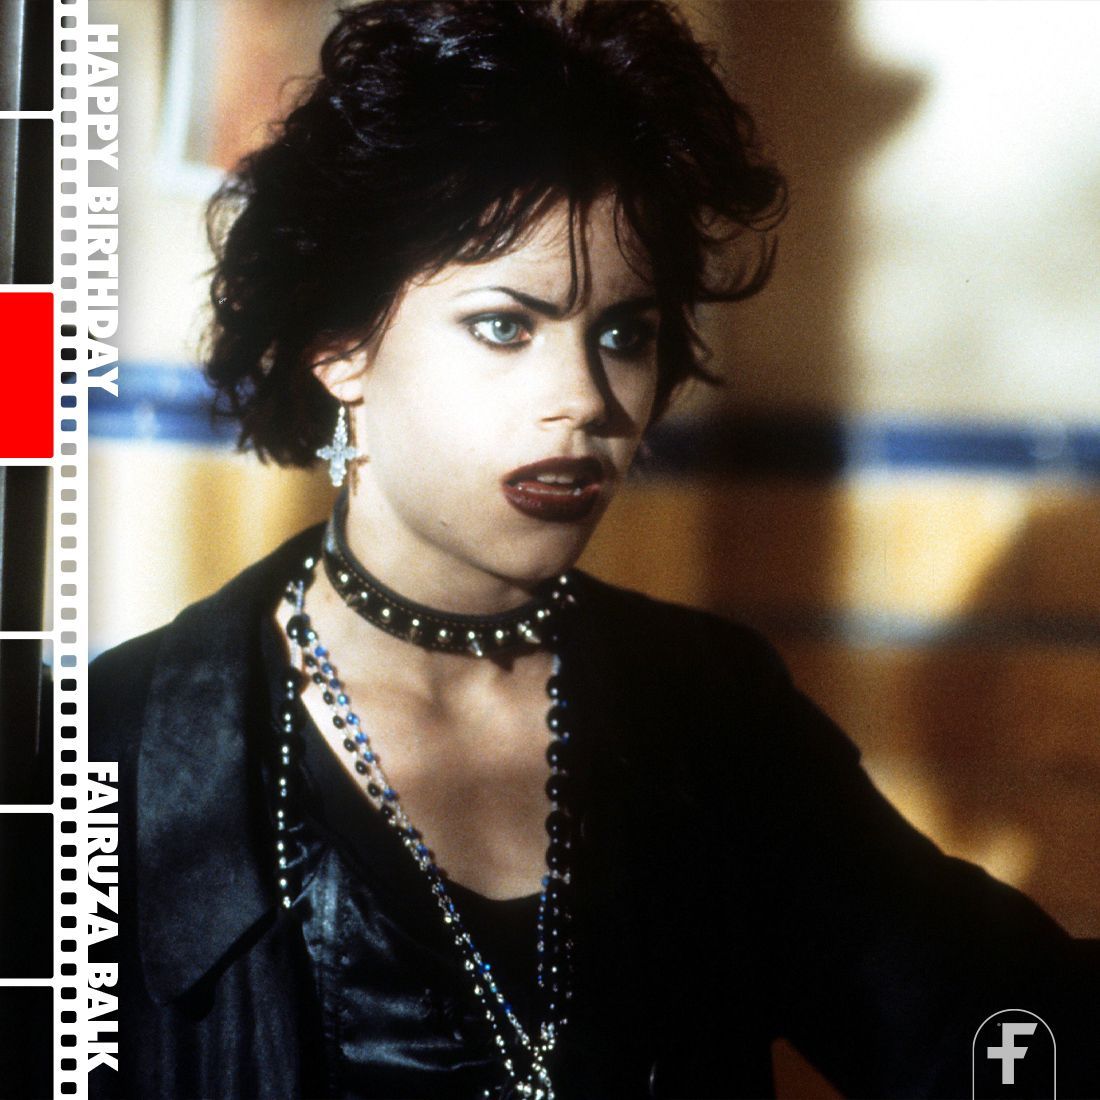 Wishing the happiest of birthdays to THE CRAFT star Fairuza Balk. Balk also appears in films THE ISLAND OF DR. MOREAU, TRESPASSERS, THE CRAFT: LEGACY, and Dorothy in the infamous RETURN TO OZ.